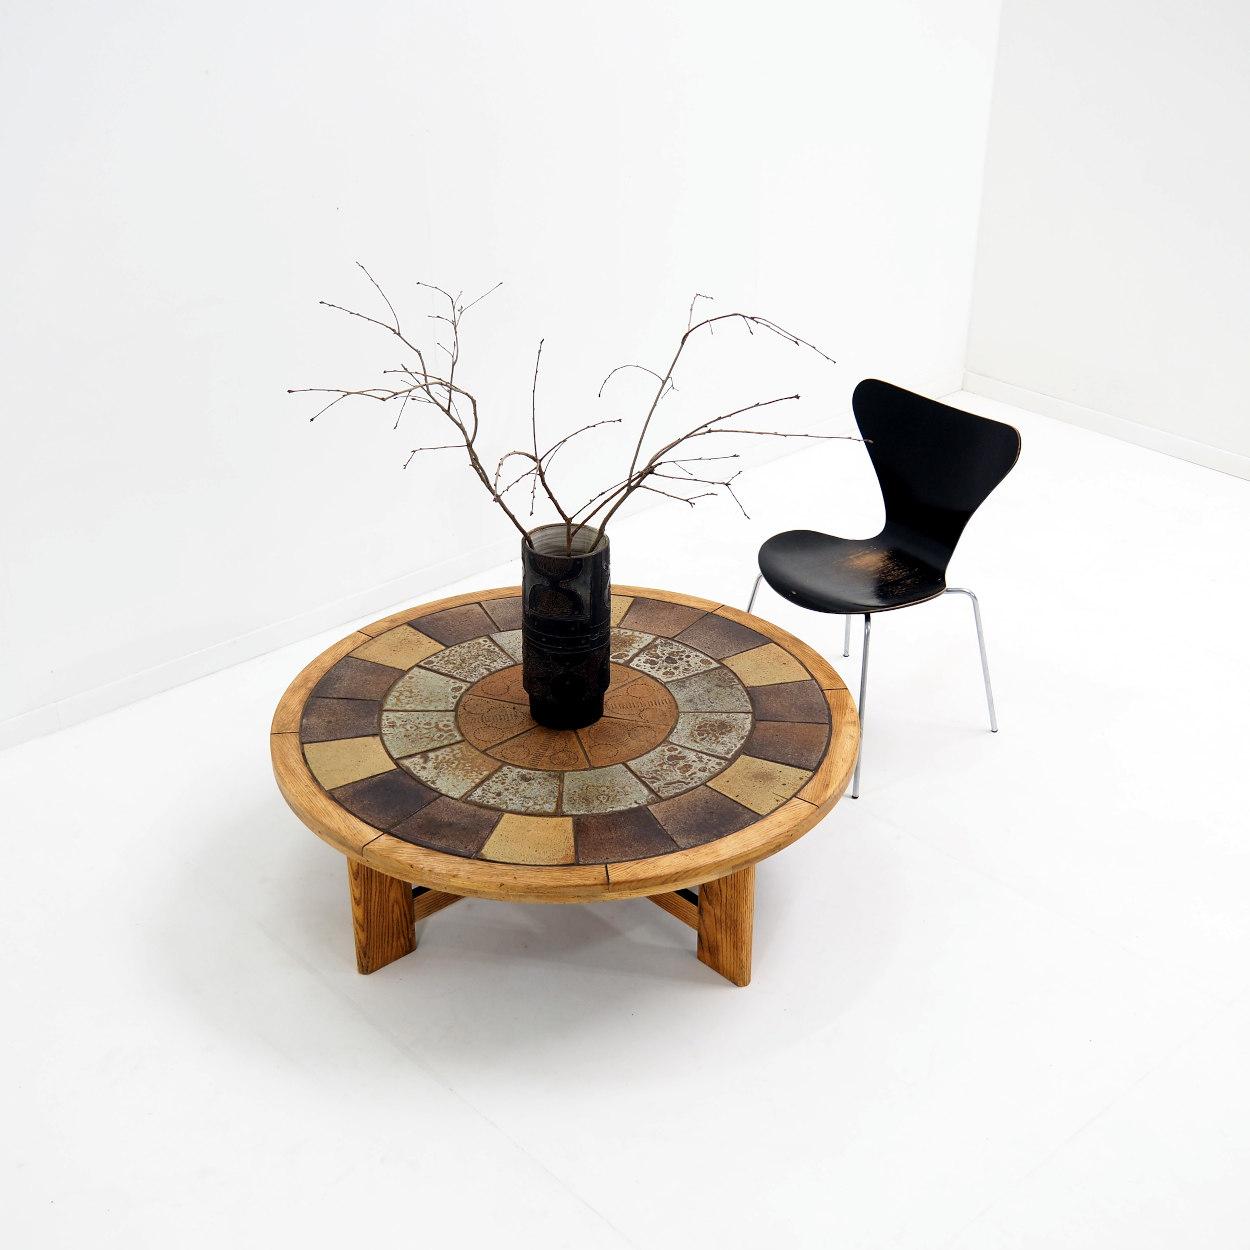 Very solid coffee table with a strong and basic architecture. The table is designed by the Danish artist designer Tue Poulsen for Haslev Mobelsnedkeri, a Danish manufacturer.

The table was made in the 1960s with handmade ceramic tiles and a solid